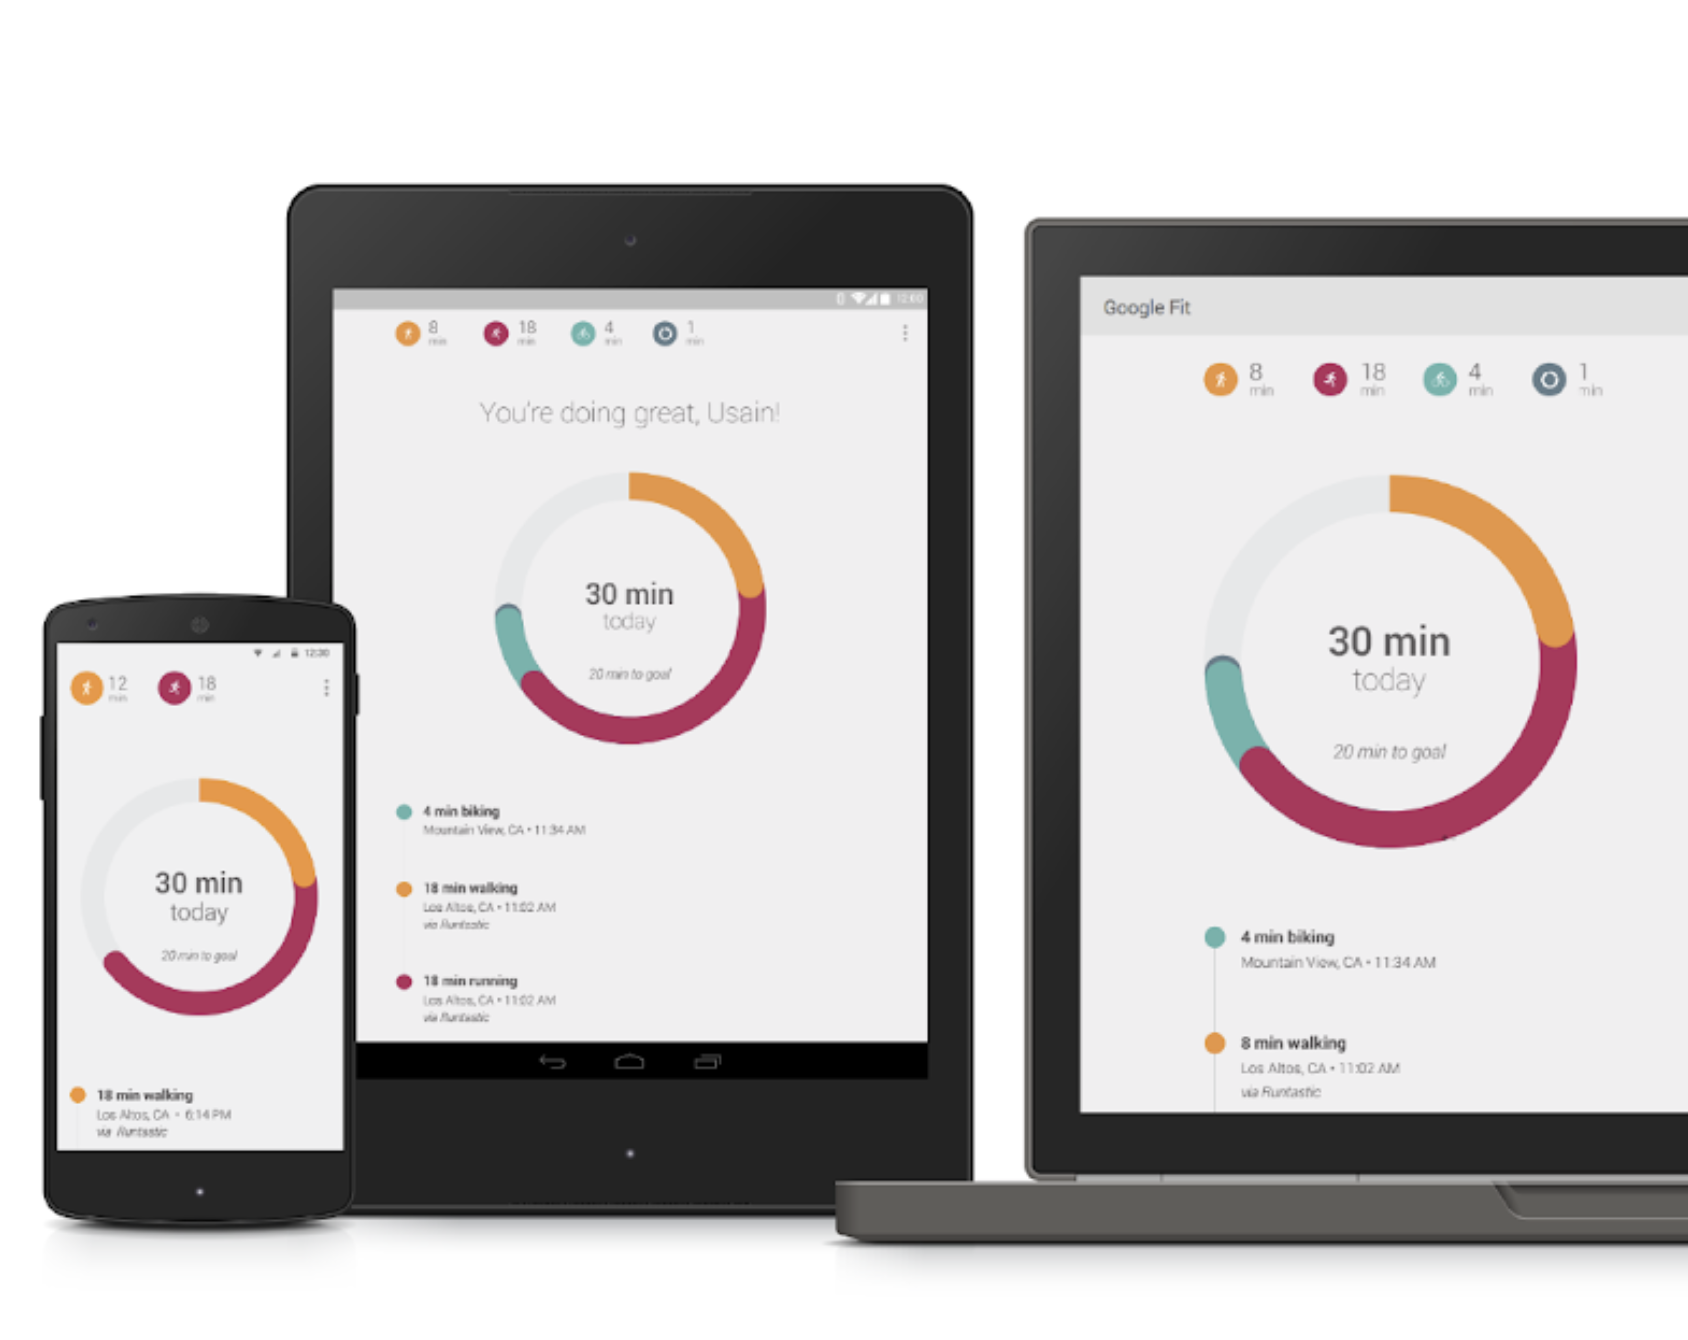 A collection of devices with the Google Fit original UI showing on each one